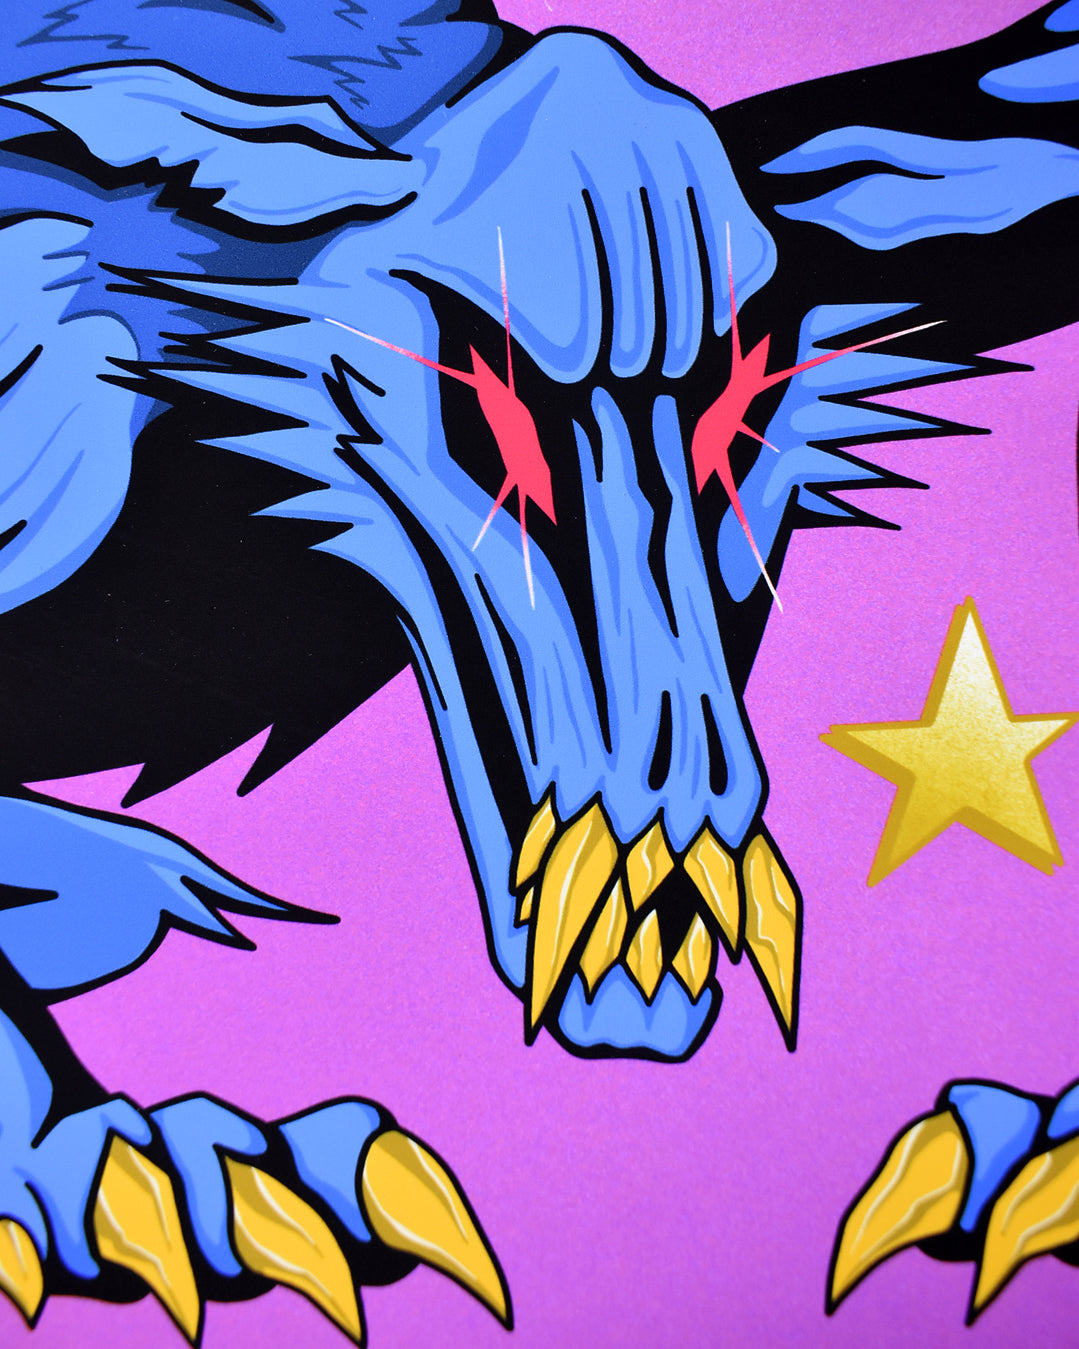 A close up of the giclee print of a blue creature with gold fangs and claws with red eyes. The creature is down on all four legs like a human dog. The background is purple. 3 gold stars are also in the background. Original art of the Ravenous Chupacabra creature from Hasbro's Magic the Gathering.